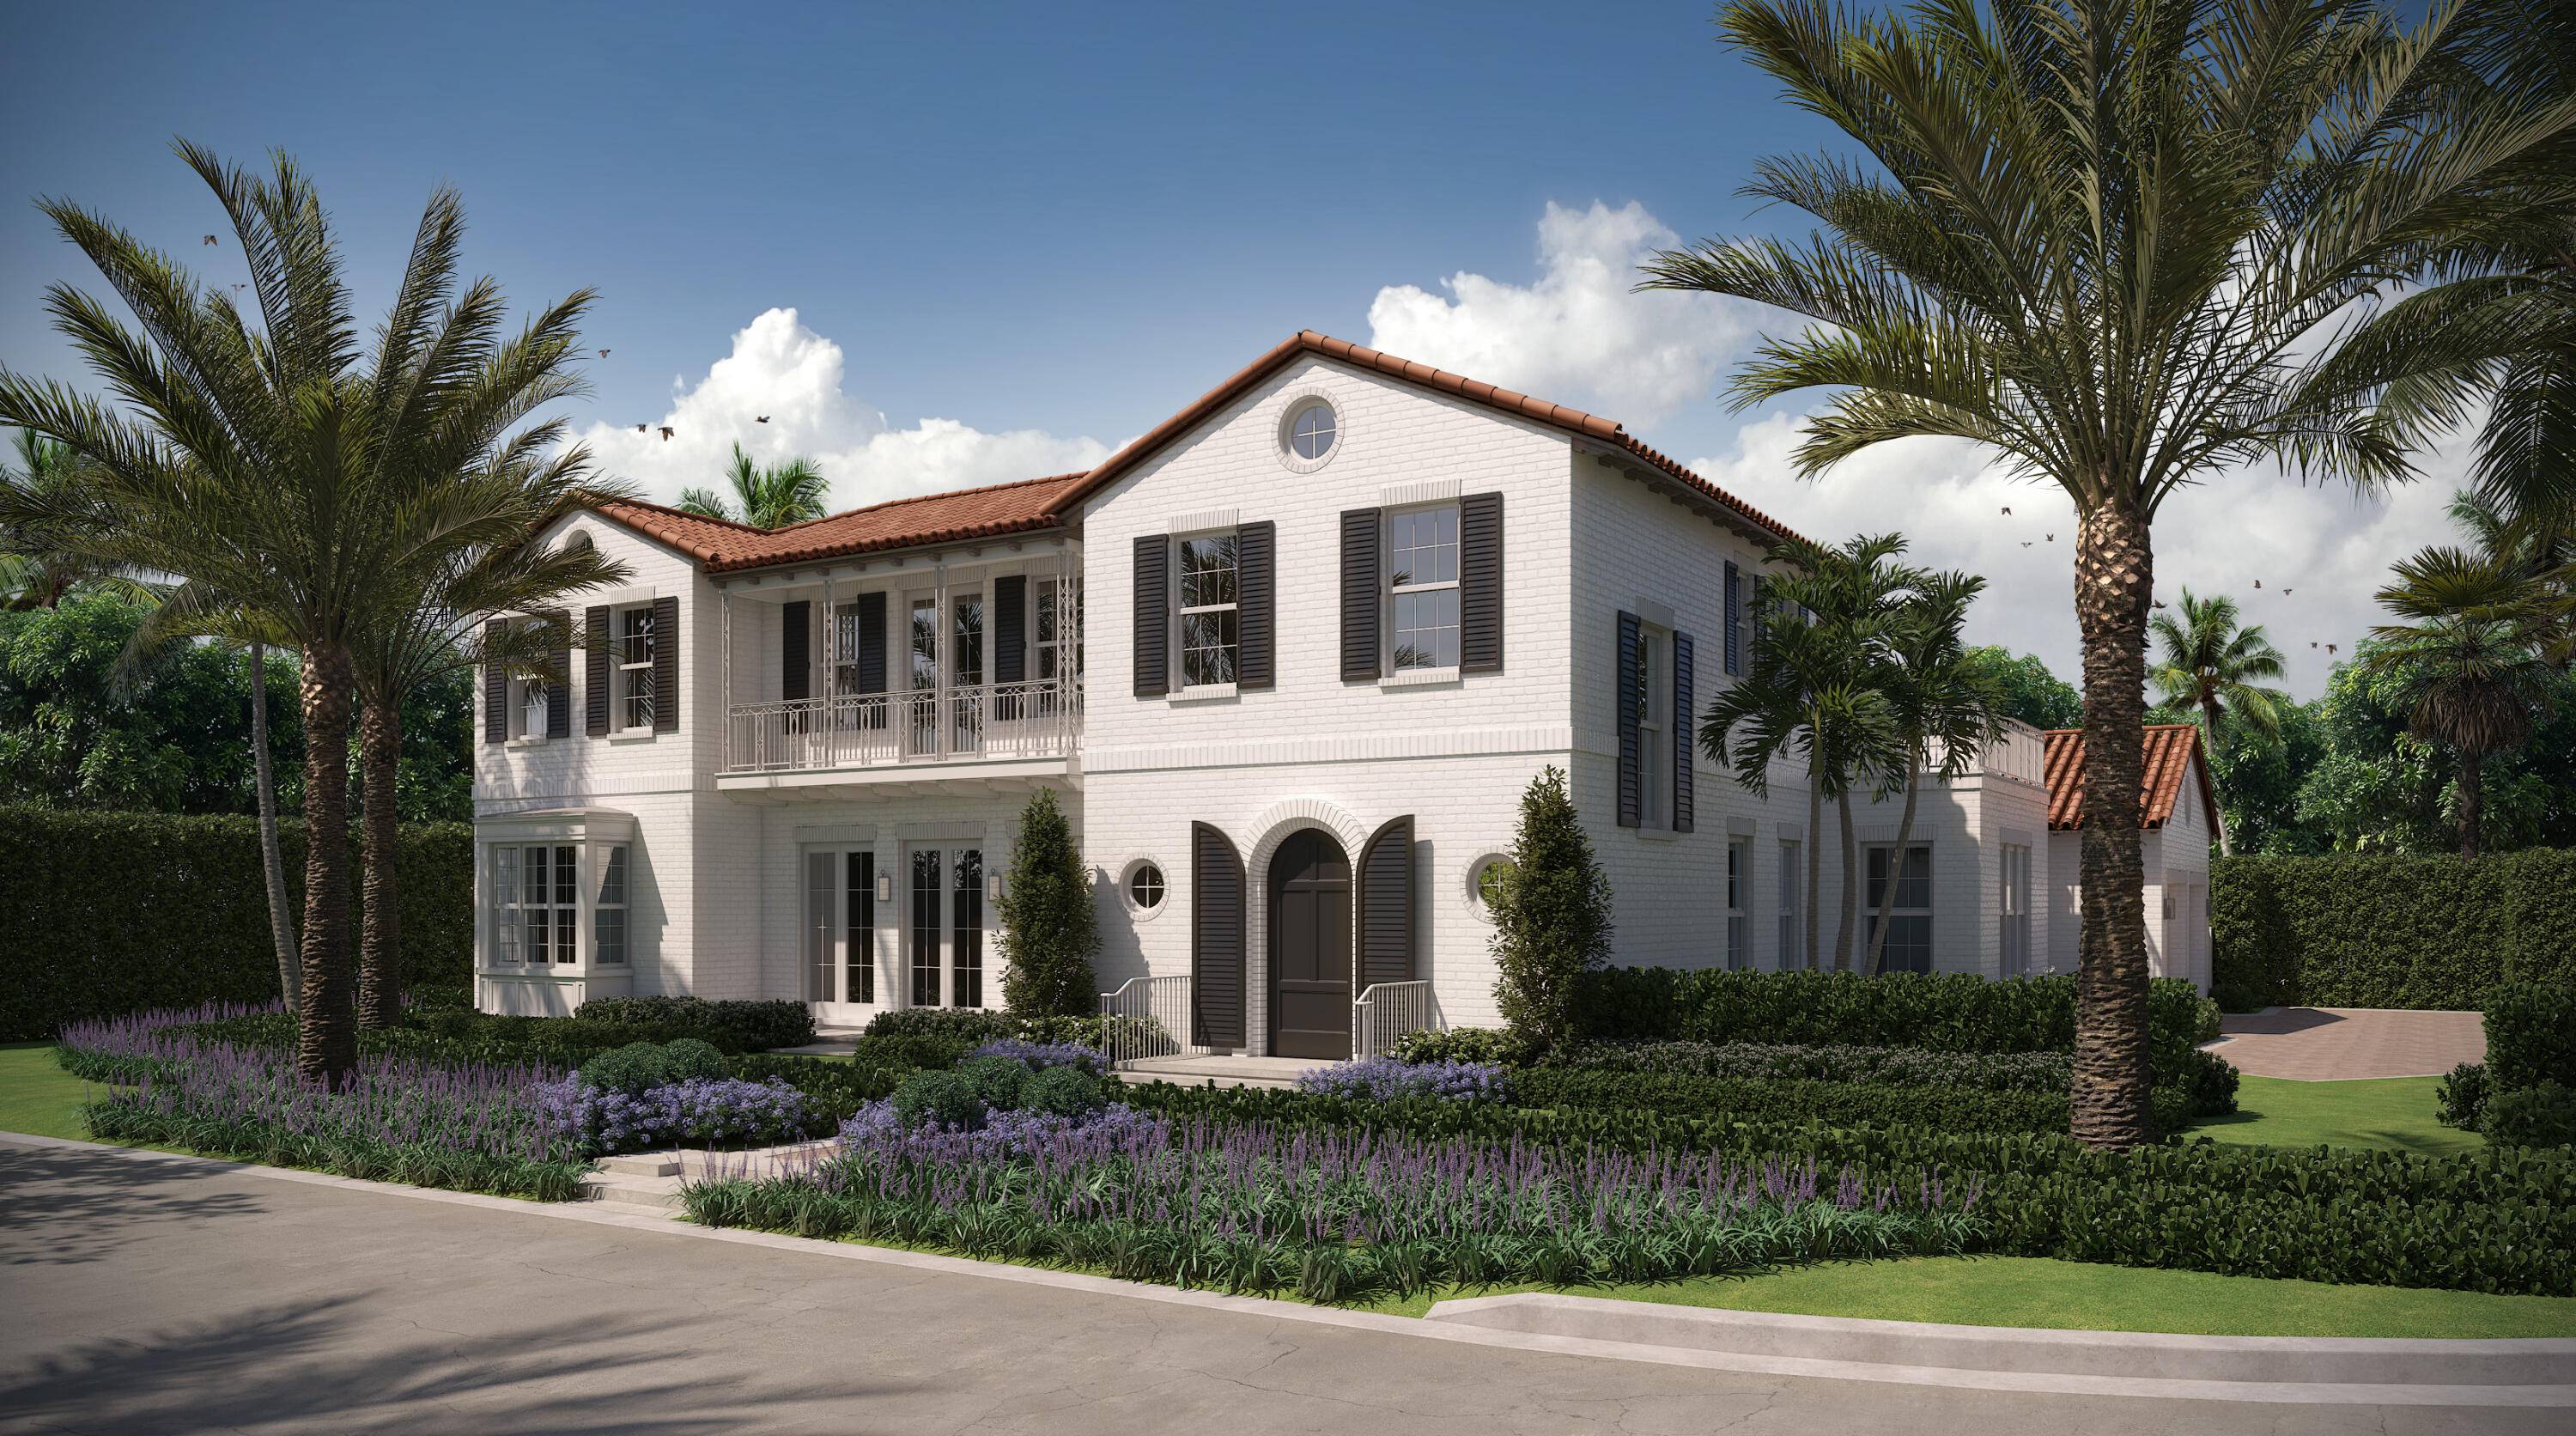 New Monterey Style. Currently under construction on a generous Northend lot close to town.